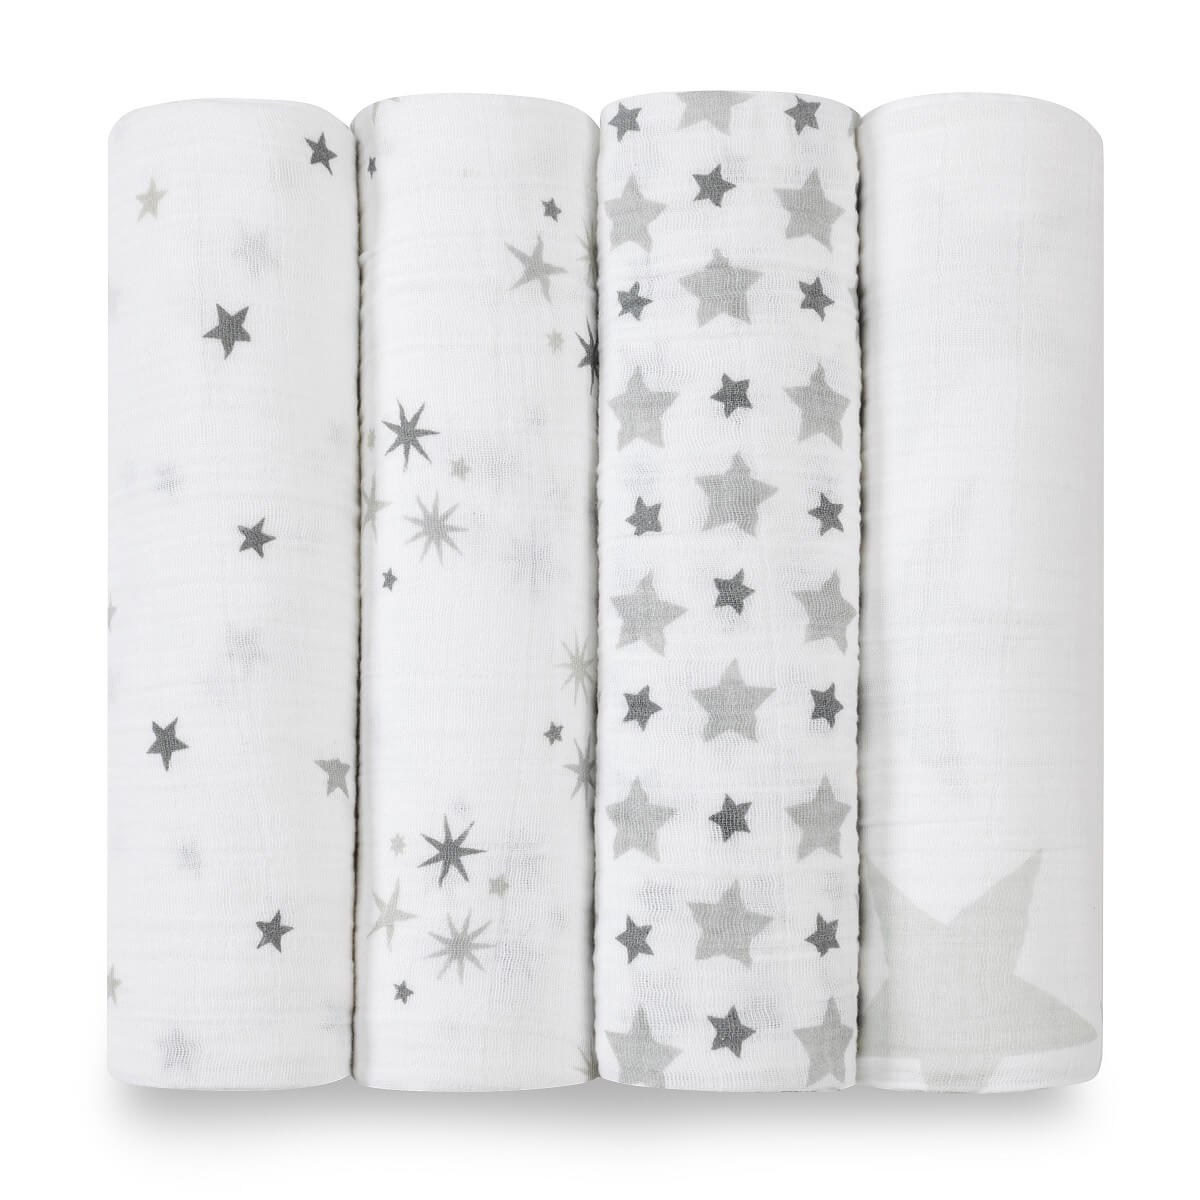 100% cotton muslin aden + anais baby swaddle blankets offer a combination of breathability, versatility, and softness. The fabric is pre-washed, ensuring that it is soft and gentle against a baby's delicate skin right from the start. Pack of 4.